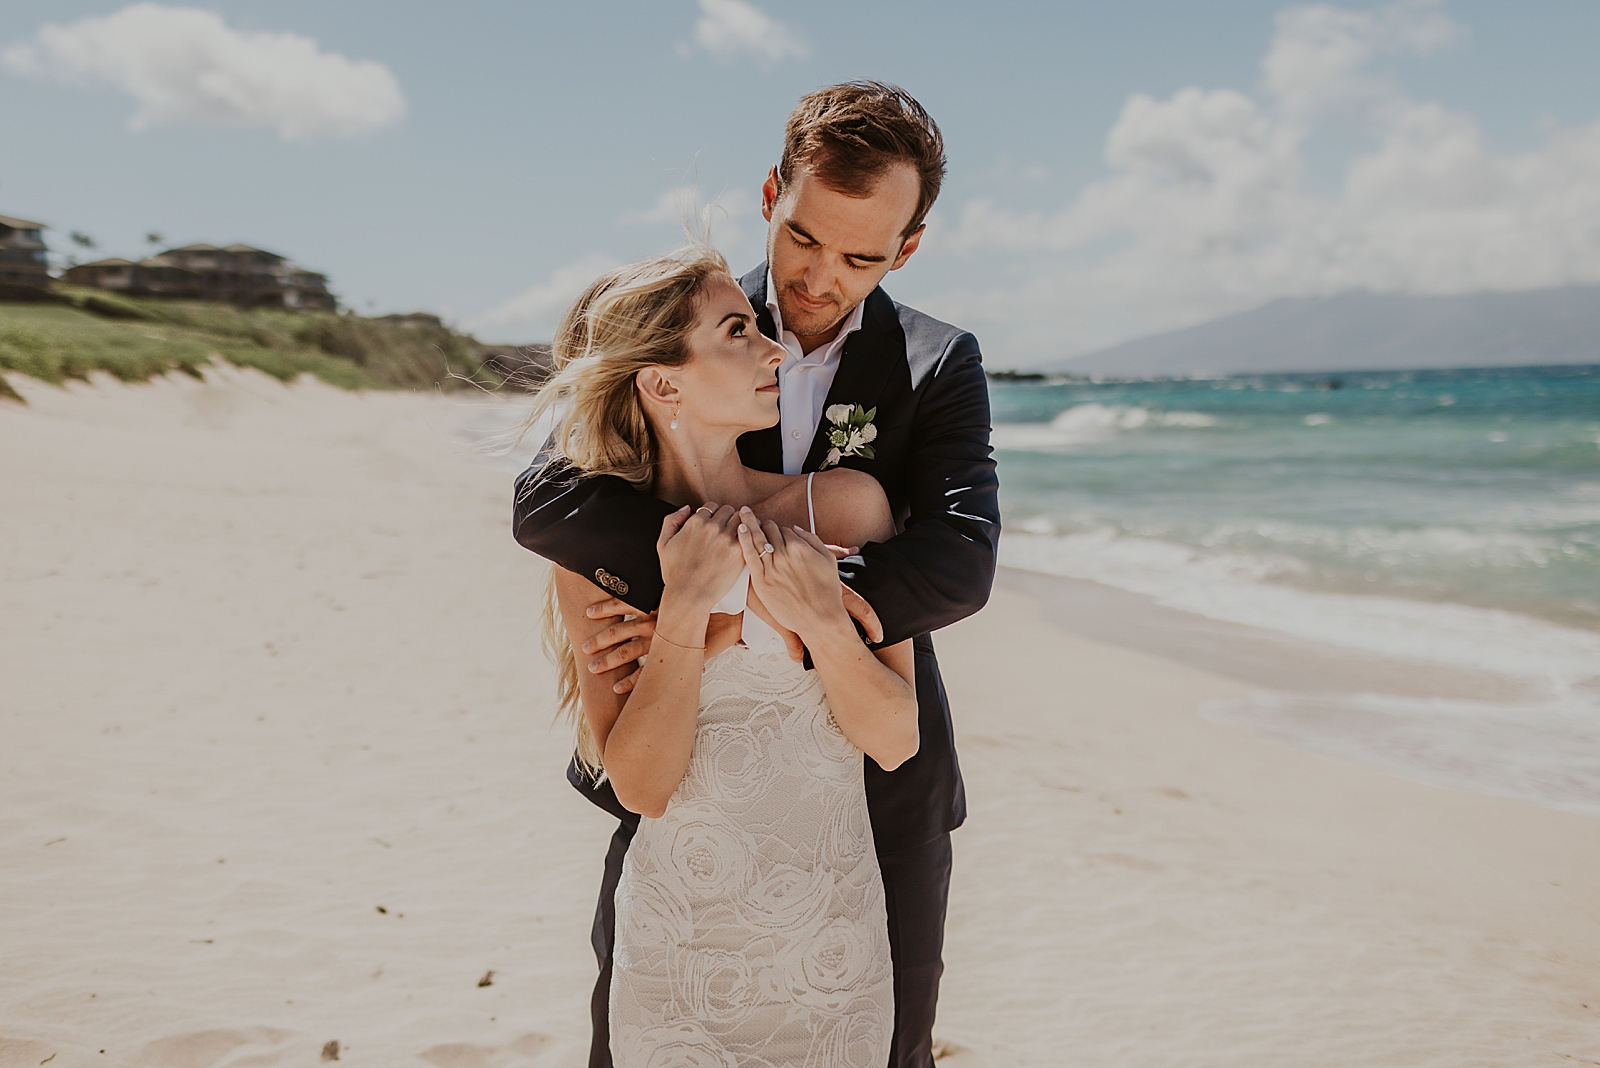 Groom holding Bride from behind on sunny beach with island in the distance